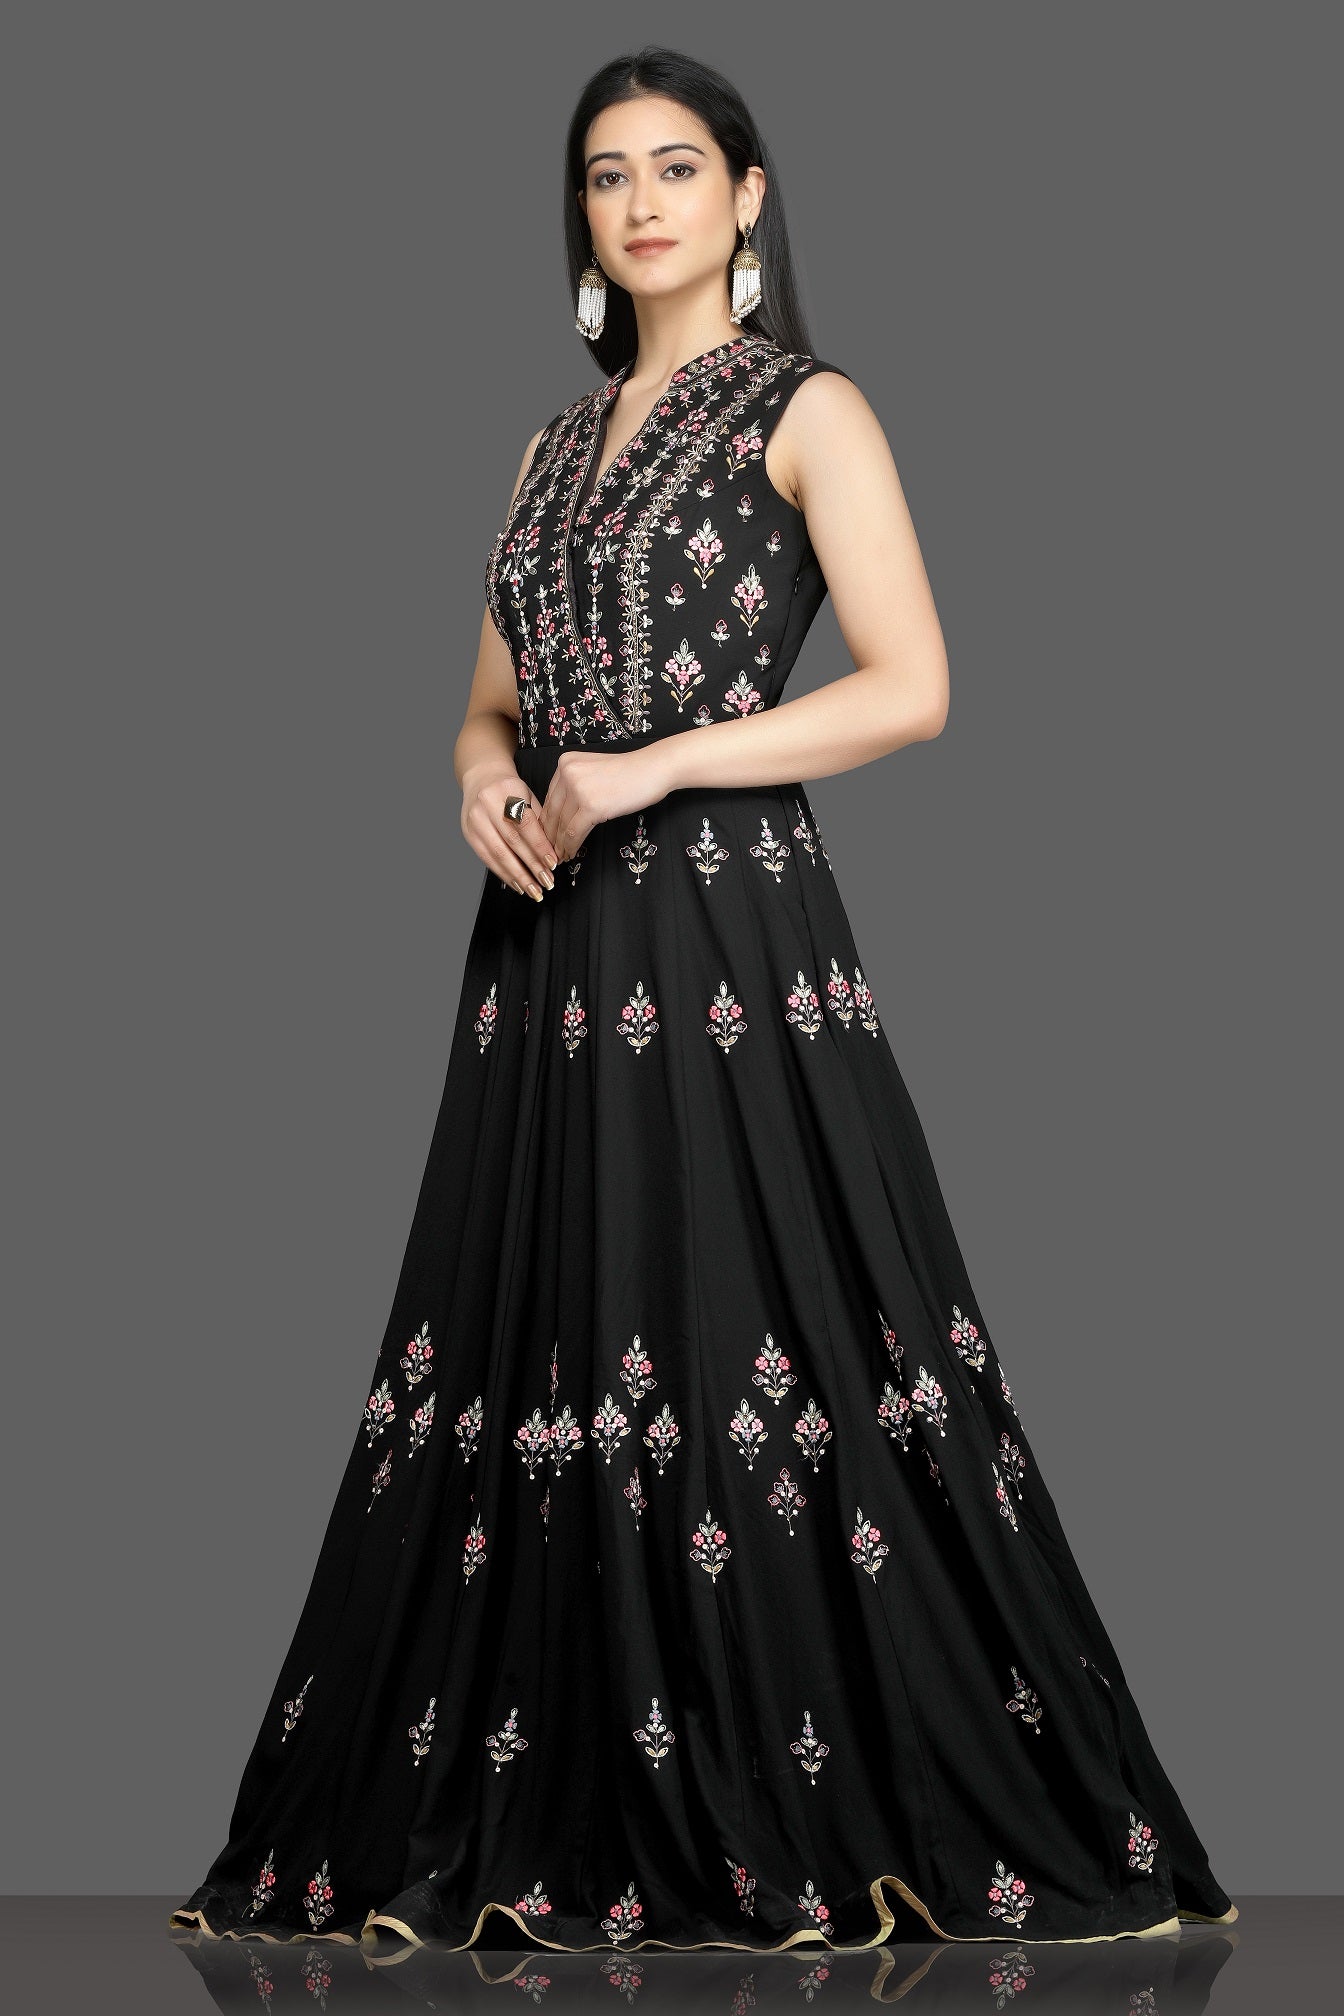 Shop gorgeous black embroidered sleeveless Anarkali gown online in USA. Flaunt your sartorial choices on special occasions with beautiful designer gowns, Anarkali suits, traditional salwar suits, Indian lehengas from Pure Elegance Indian fashion boutique in USA. -left